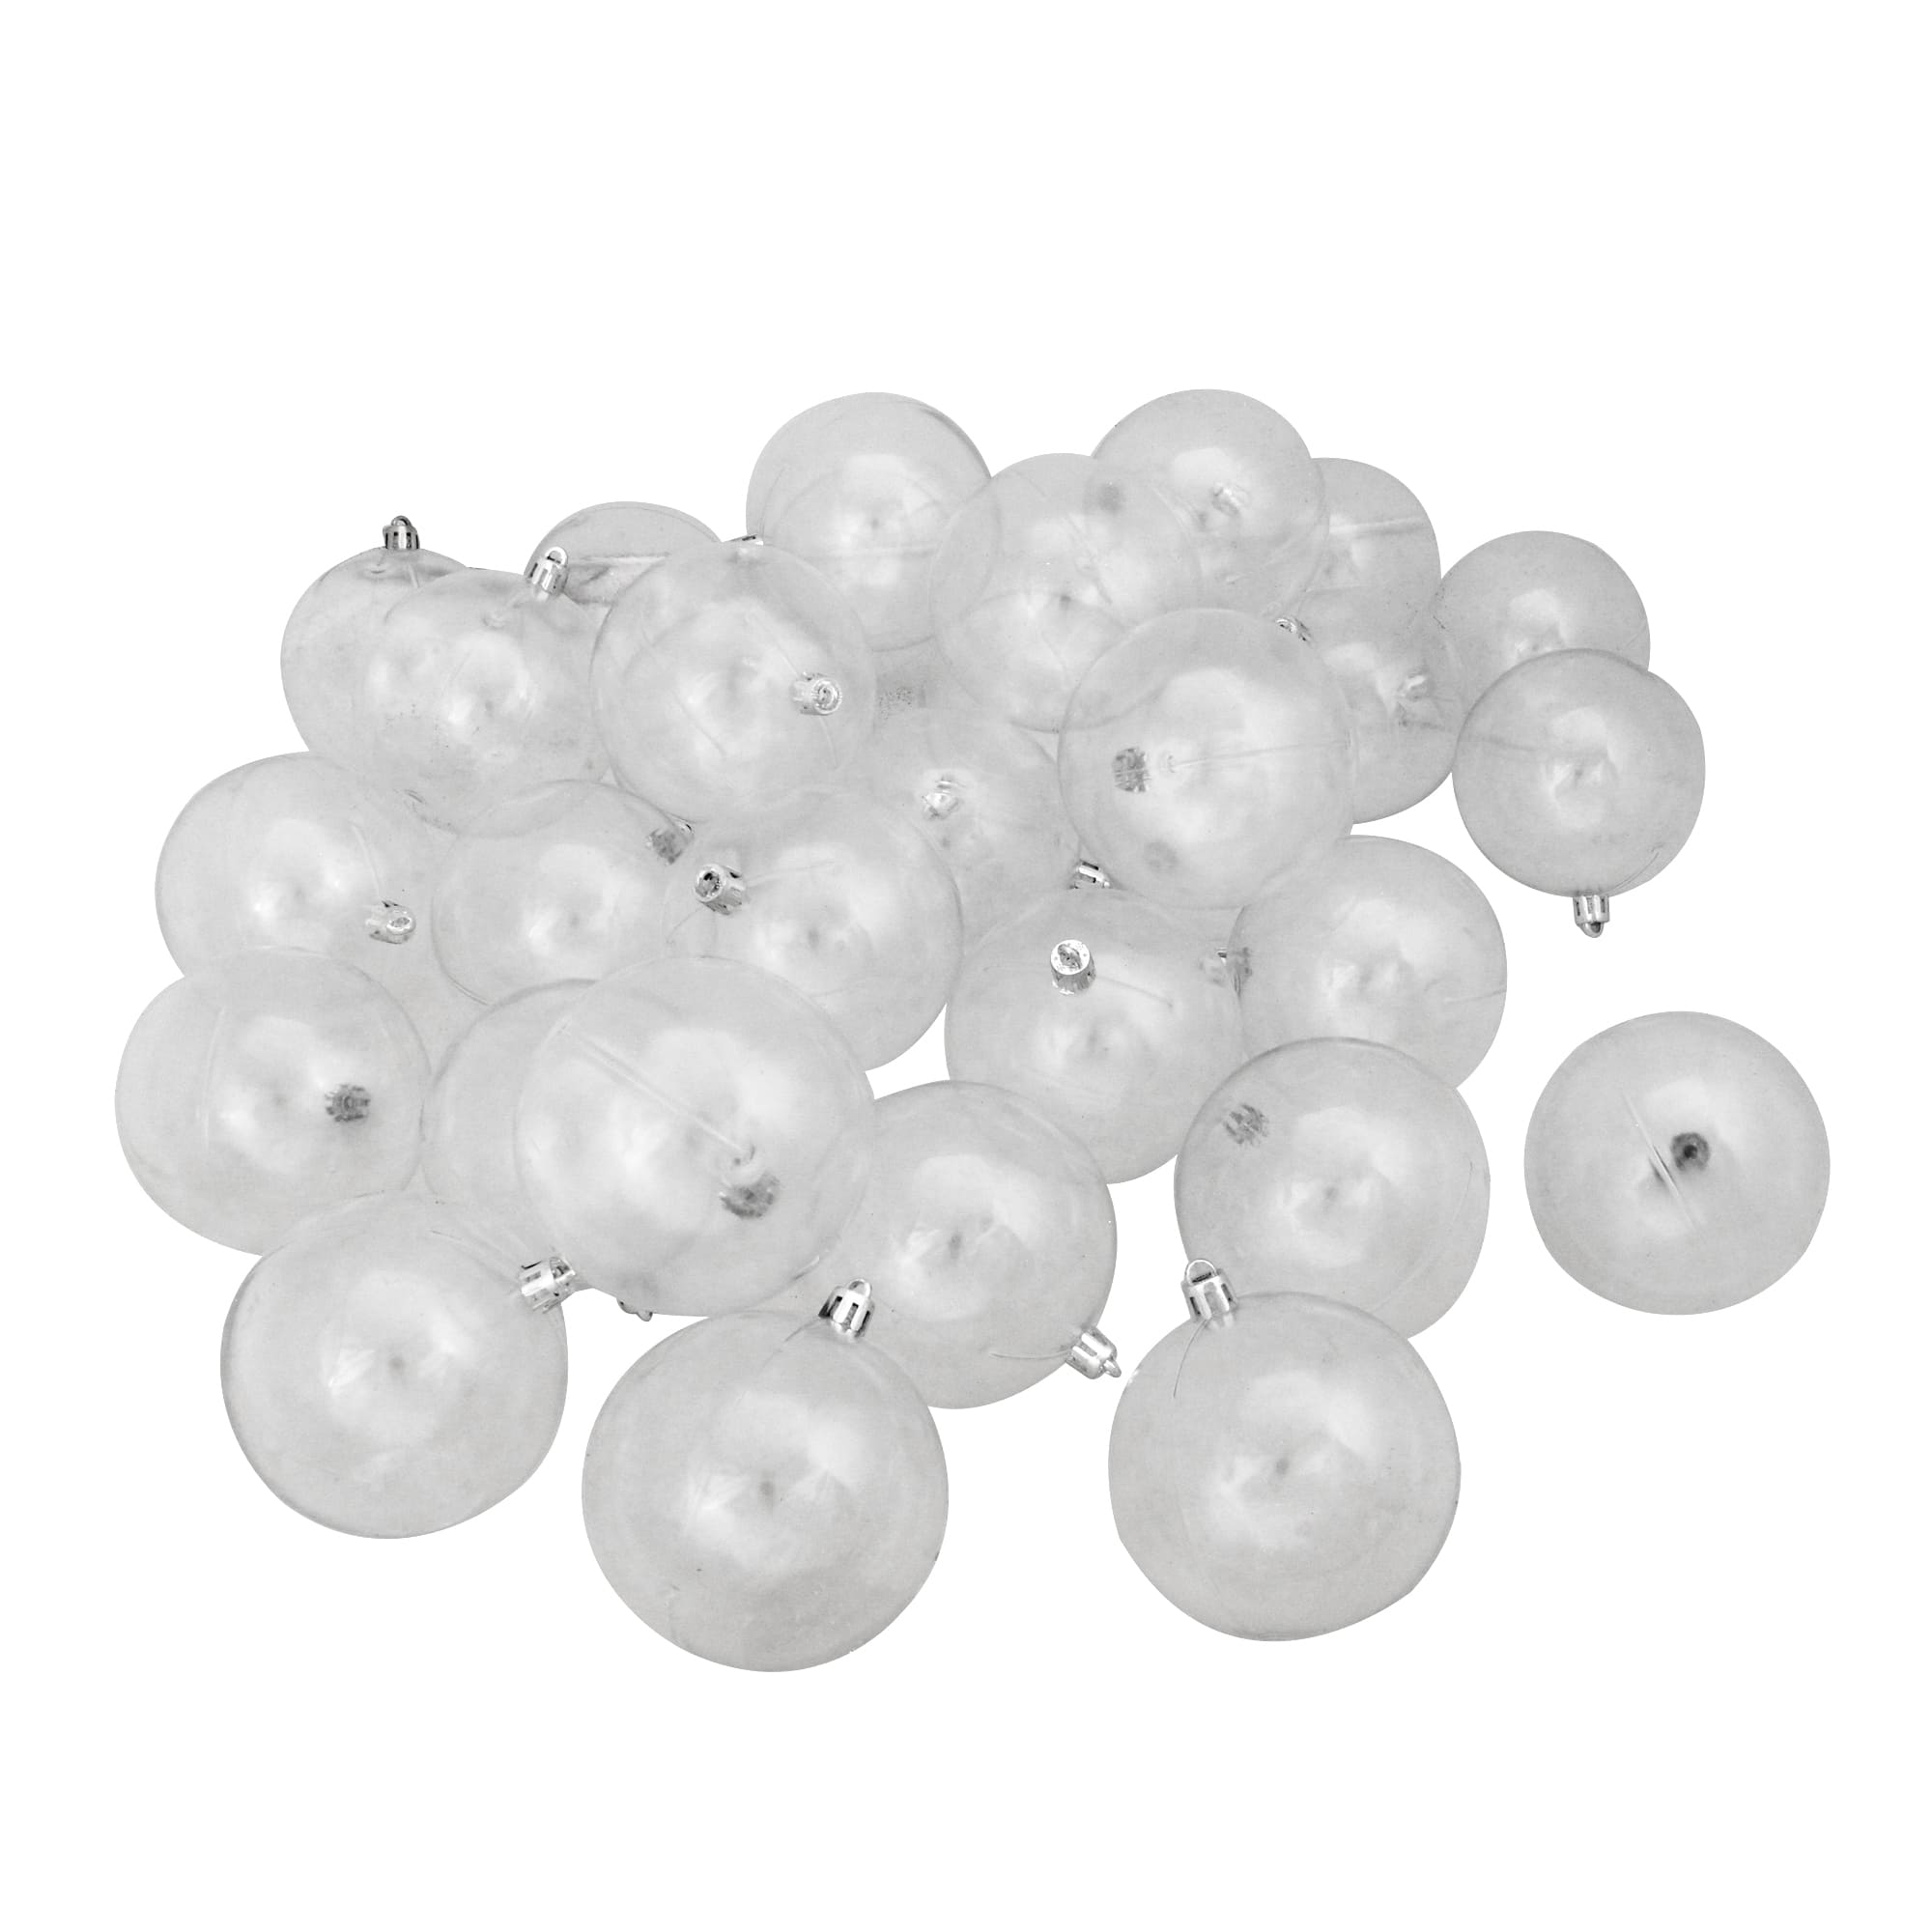 32ct. Clear Shatterproof Shiny Christmas Ball Ornaments